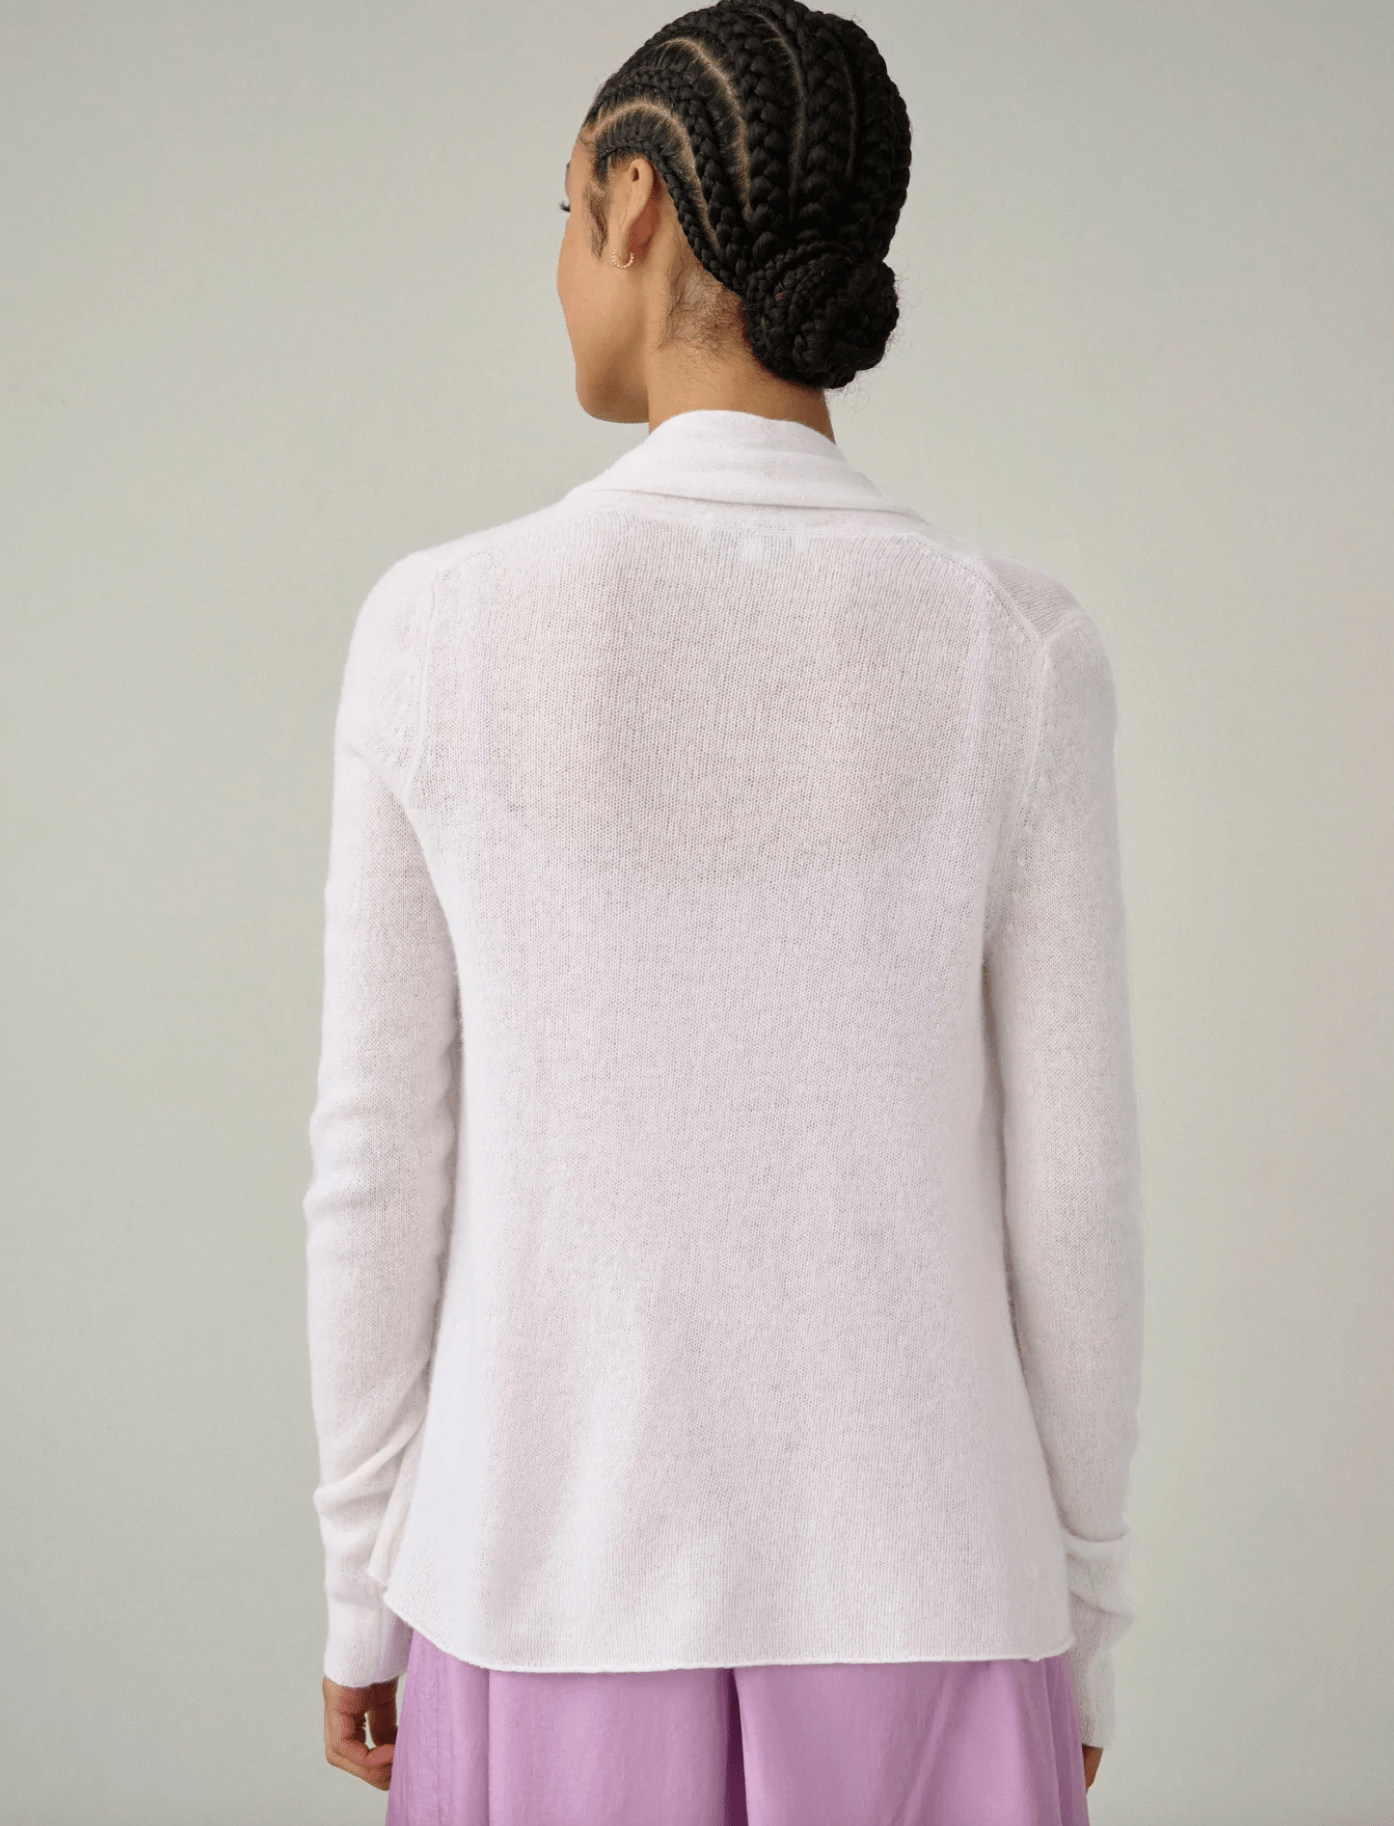 essential mini trapeze cardigan in soft white by White and Warren - The perfect take anywhere cardigan, Wear this 4 seasons, Shop Paula & Chlo - back view